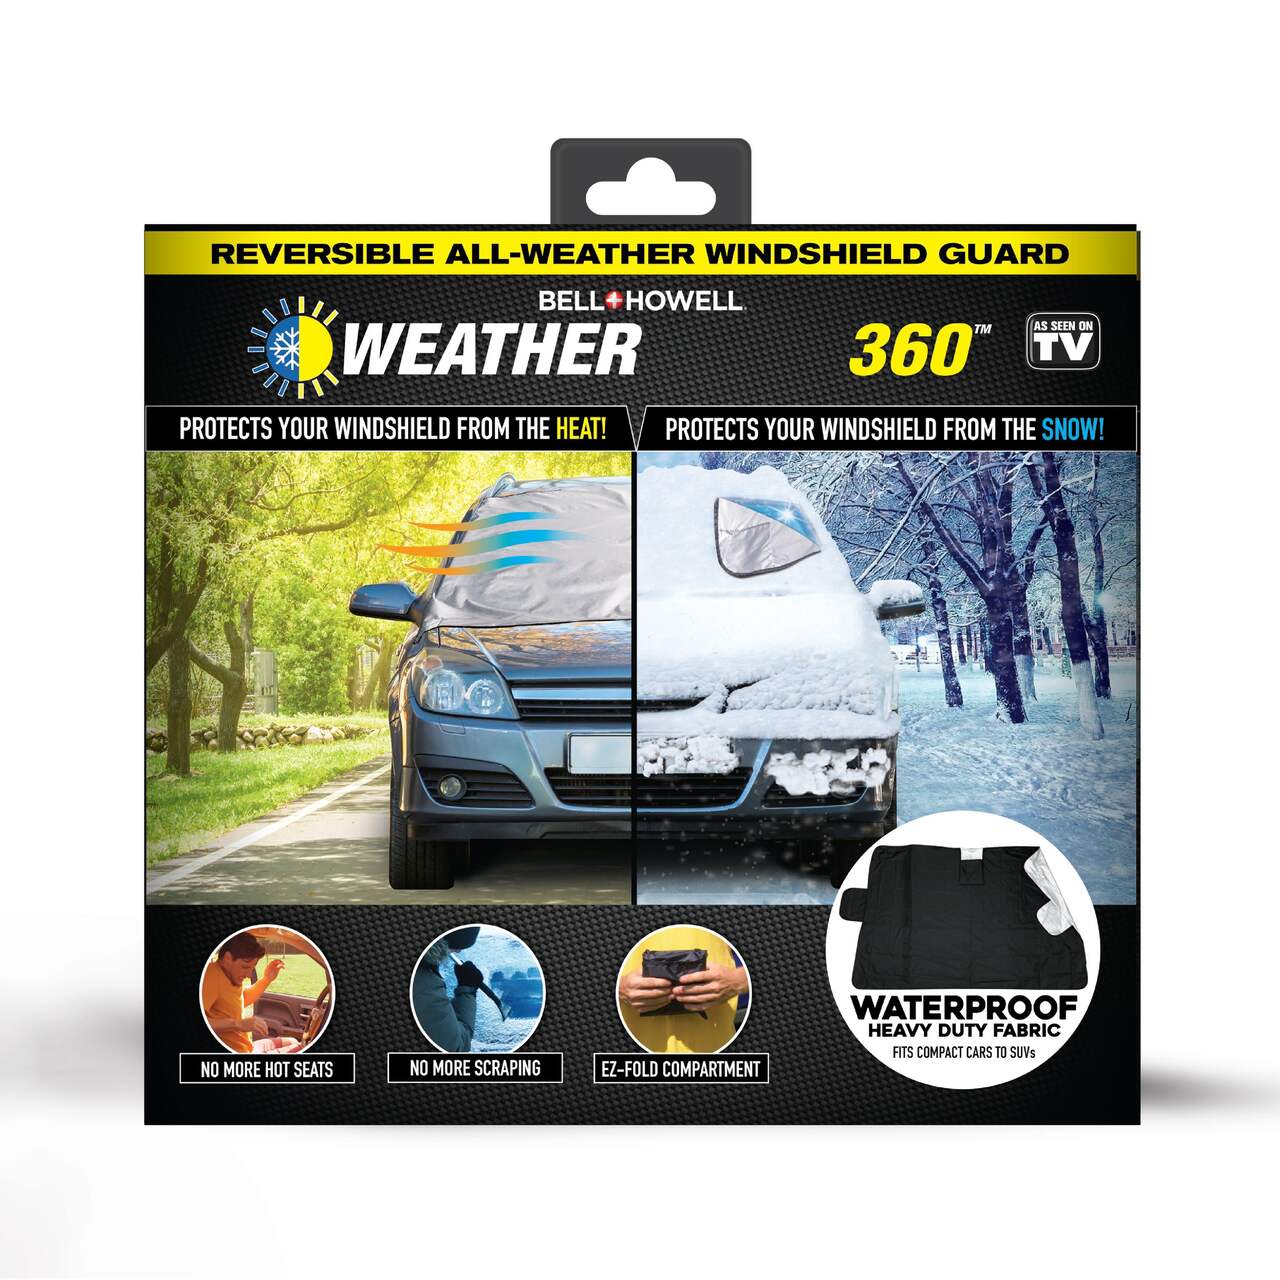 https://media-www.canadiantire.ca/product/automotive/car-care-accessories/auto-winter-accessories/0304220/weatherforce-360-magnetic-windshield-cover-121e7ba7-cebe-4853-8776-10687f18b559-jpgrendition.jpg?imdensity=1&imwidth=1244&impolicy=mZoom